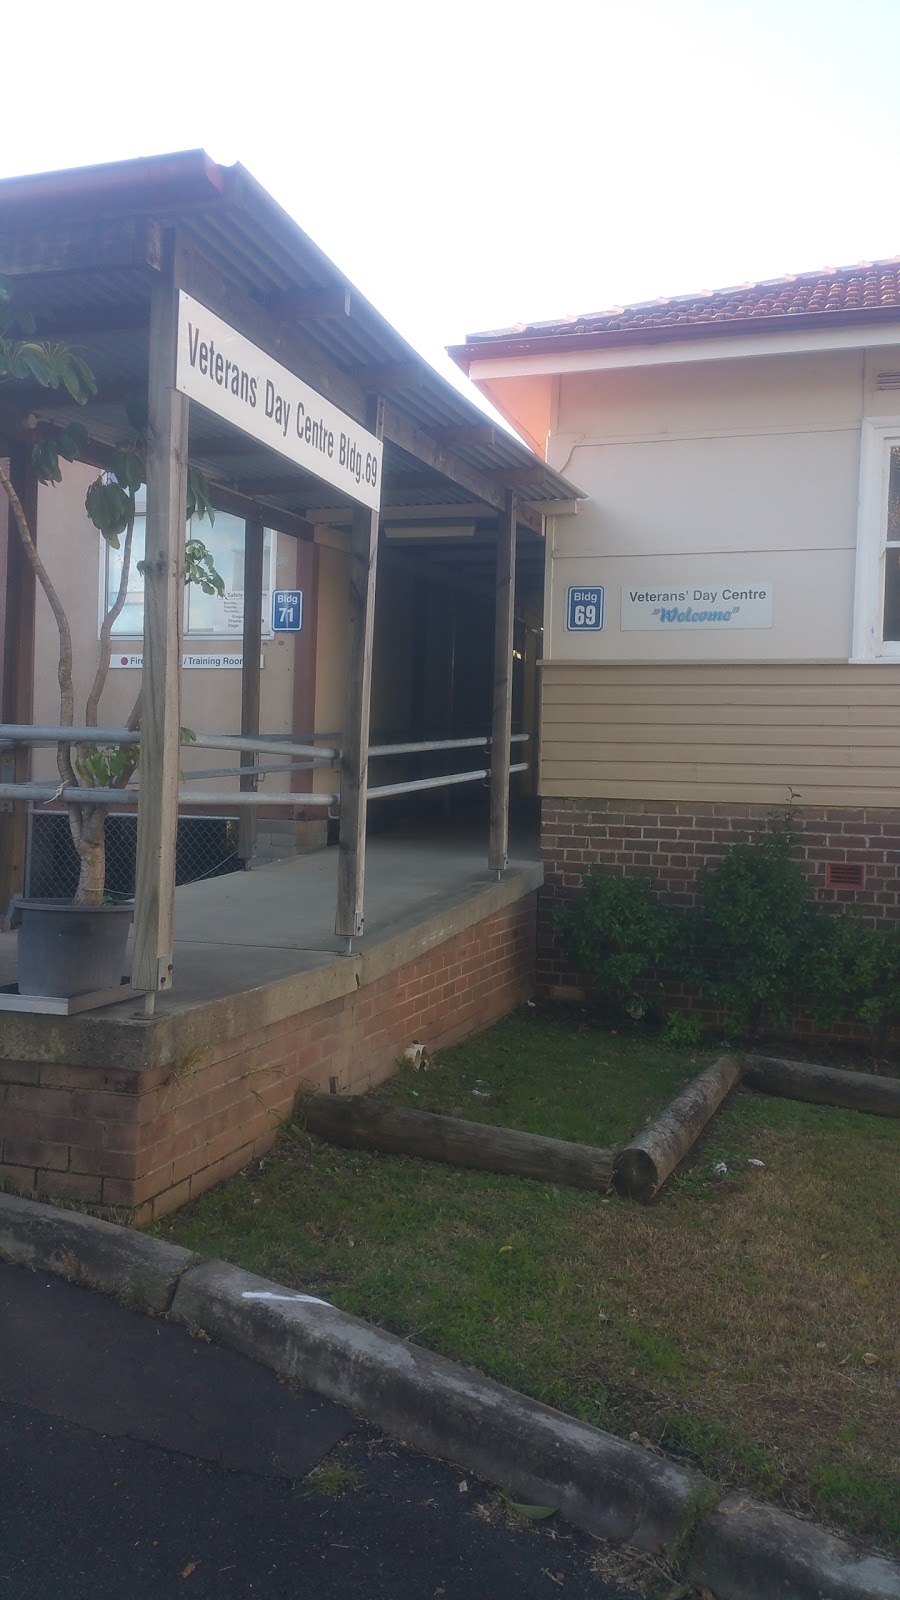 Building 69 Veterans Day Centre | hospital | 2 Currawang St, Concord West NSW 2138, Australia